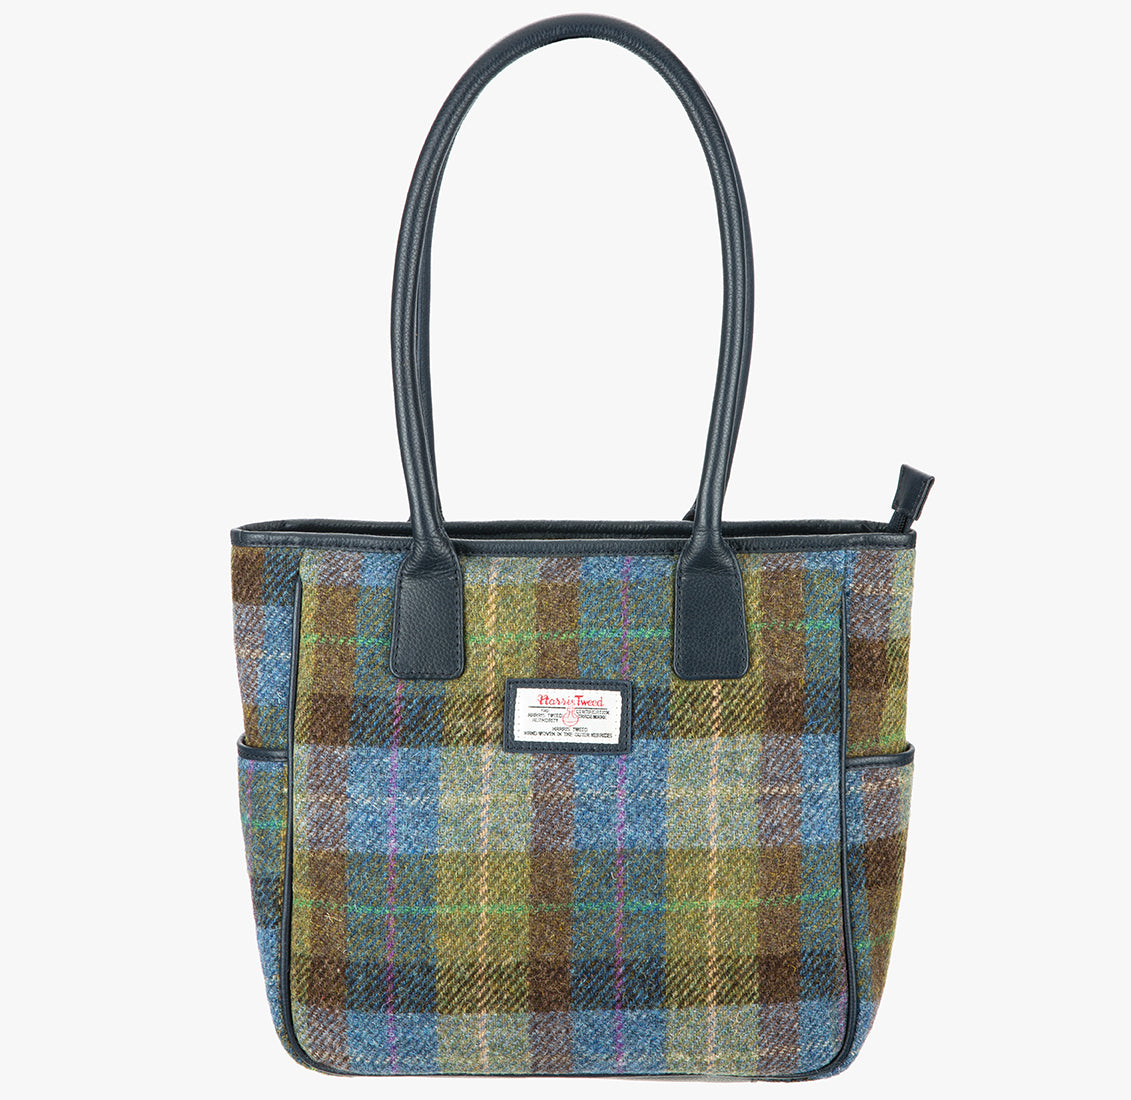 Harris Tweed tote bag in a blue, green and brown check with navy blue leather handles that go over the shoulder. It has a pocket on each side of the bag trimmed with navy blue leather. It also has a harris tweed logo on the front of the bag in the middle which is sewn onto a leather label holder.